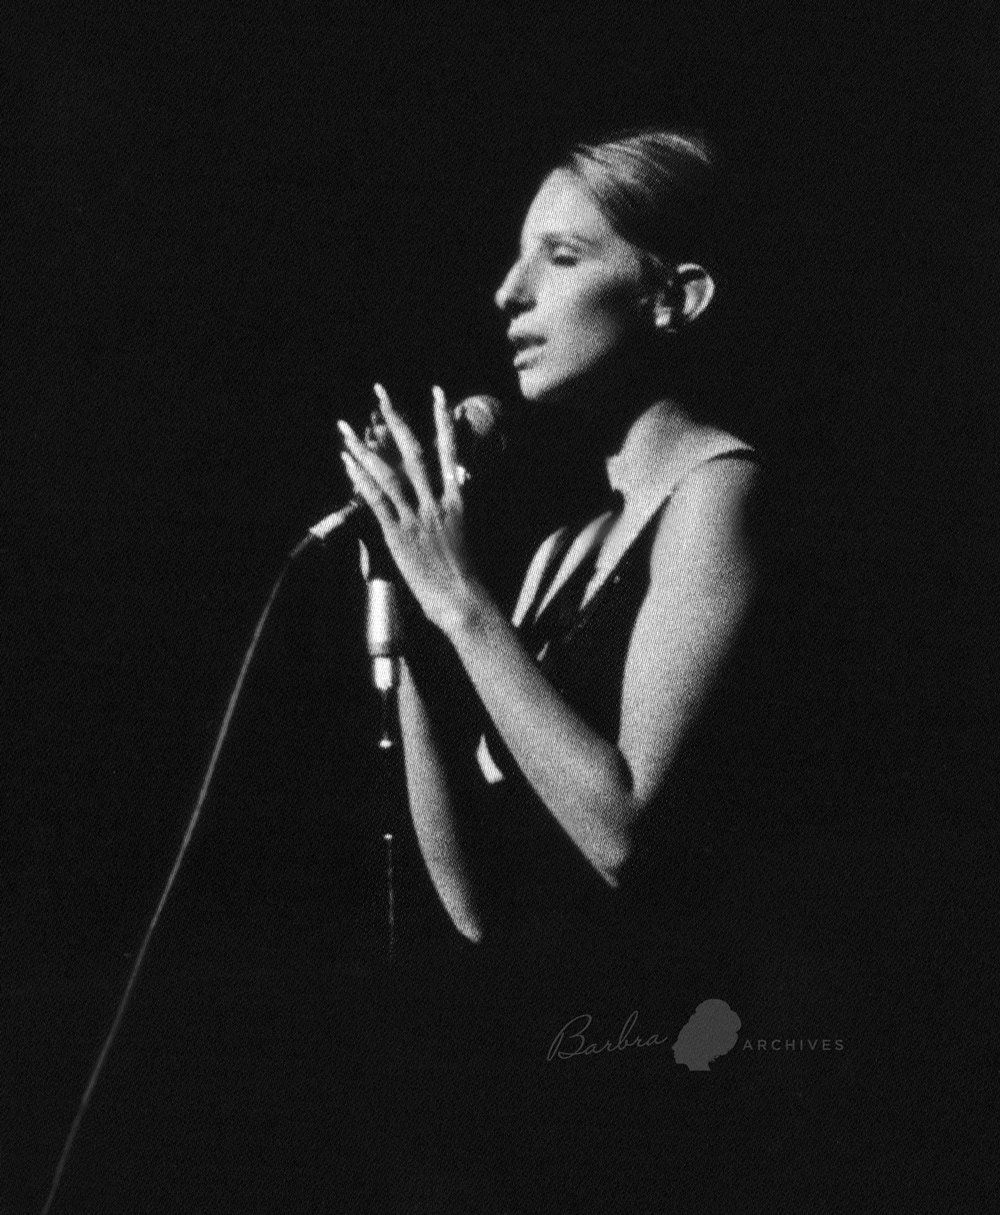 Streisand singing on stage at the Riviera Hotel, 1970.